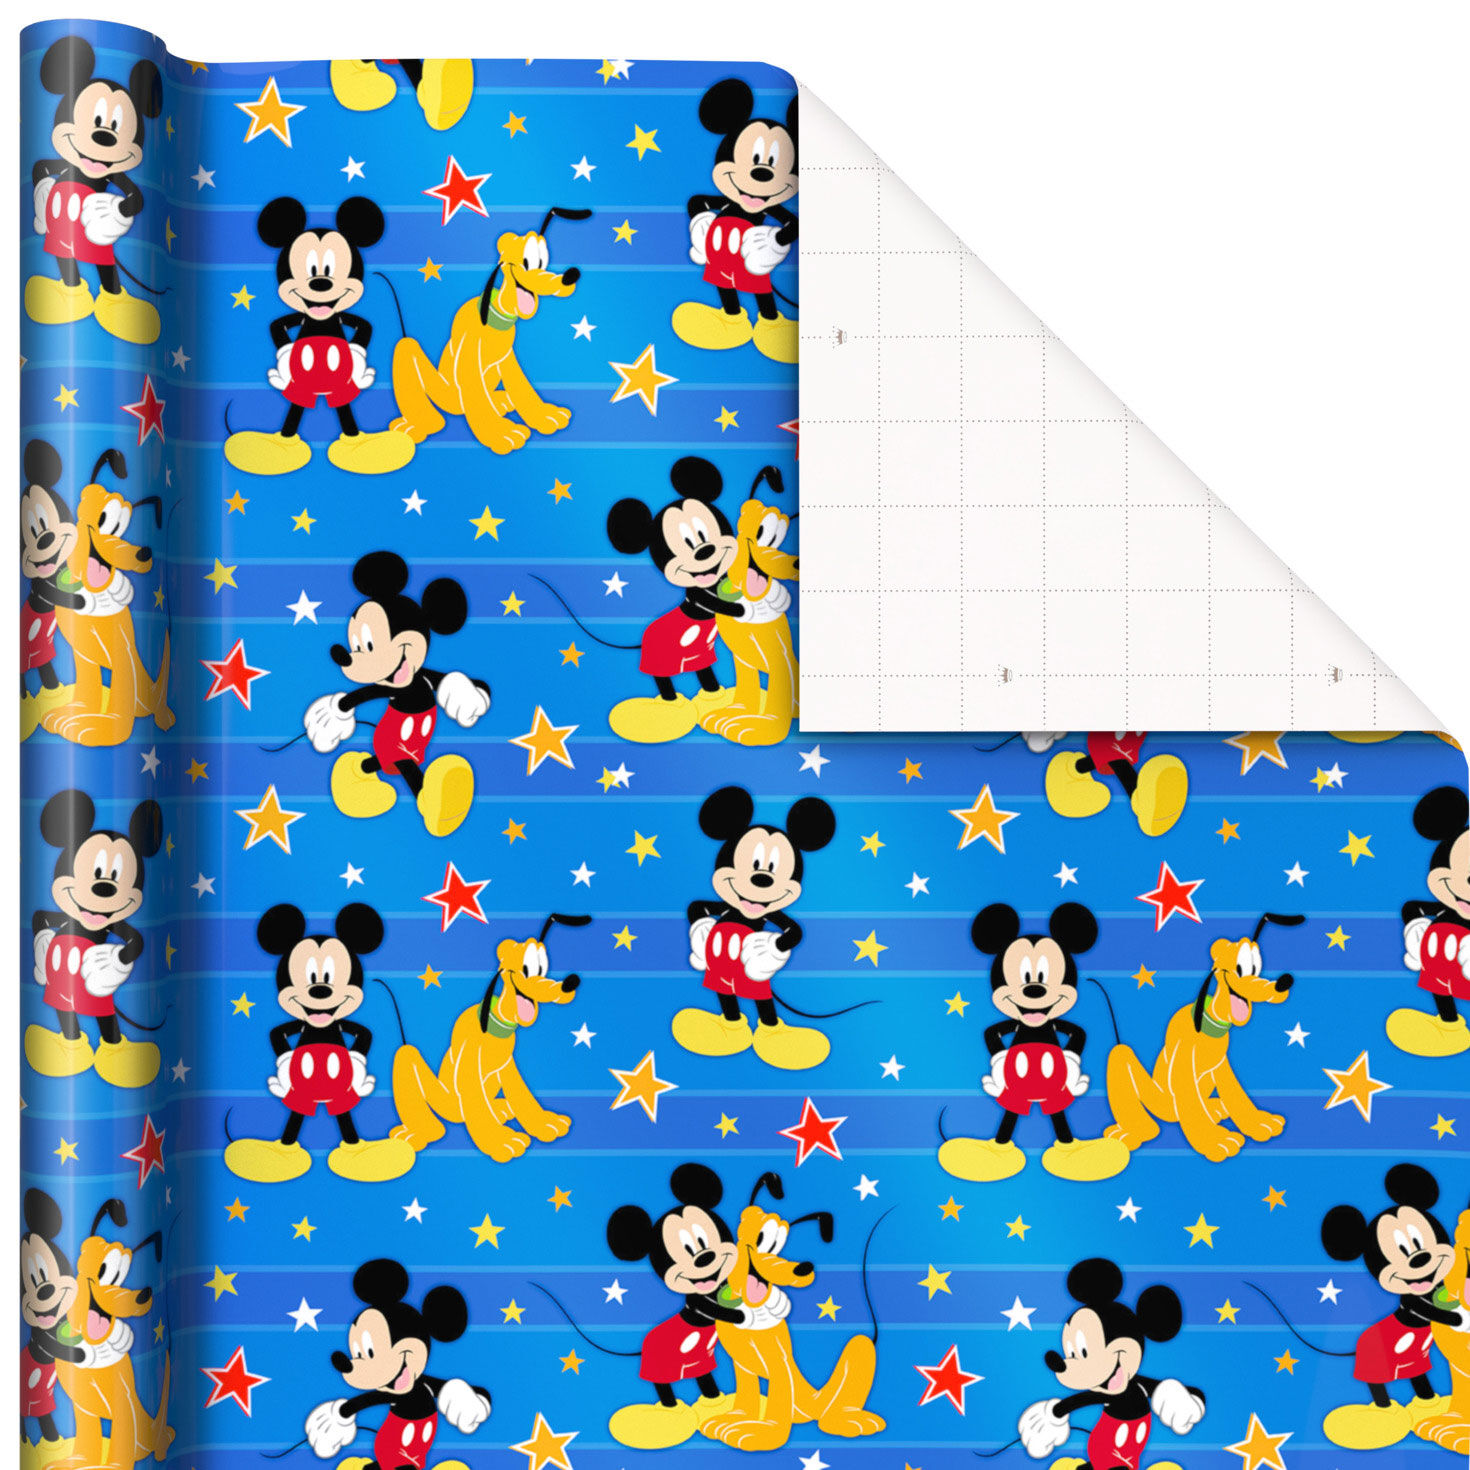 21 Magical Gift Ideas for Disney Mickey Mouse Fans